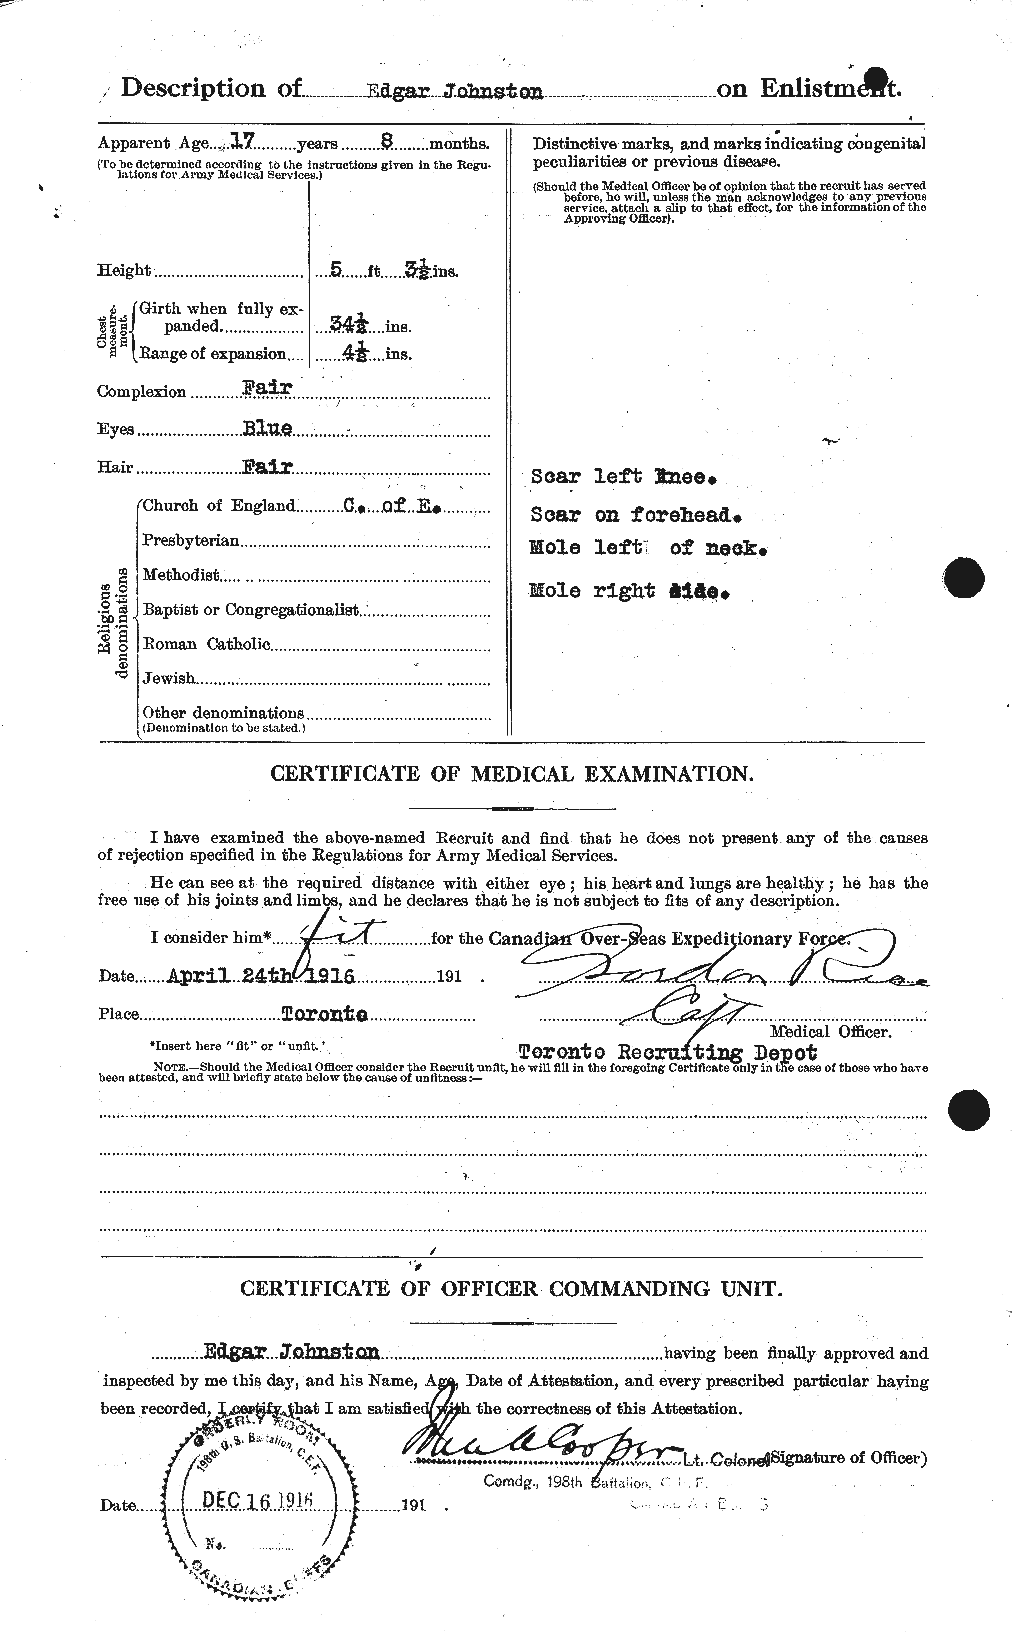 Personnel Records of the First World War - CEF 423203b